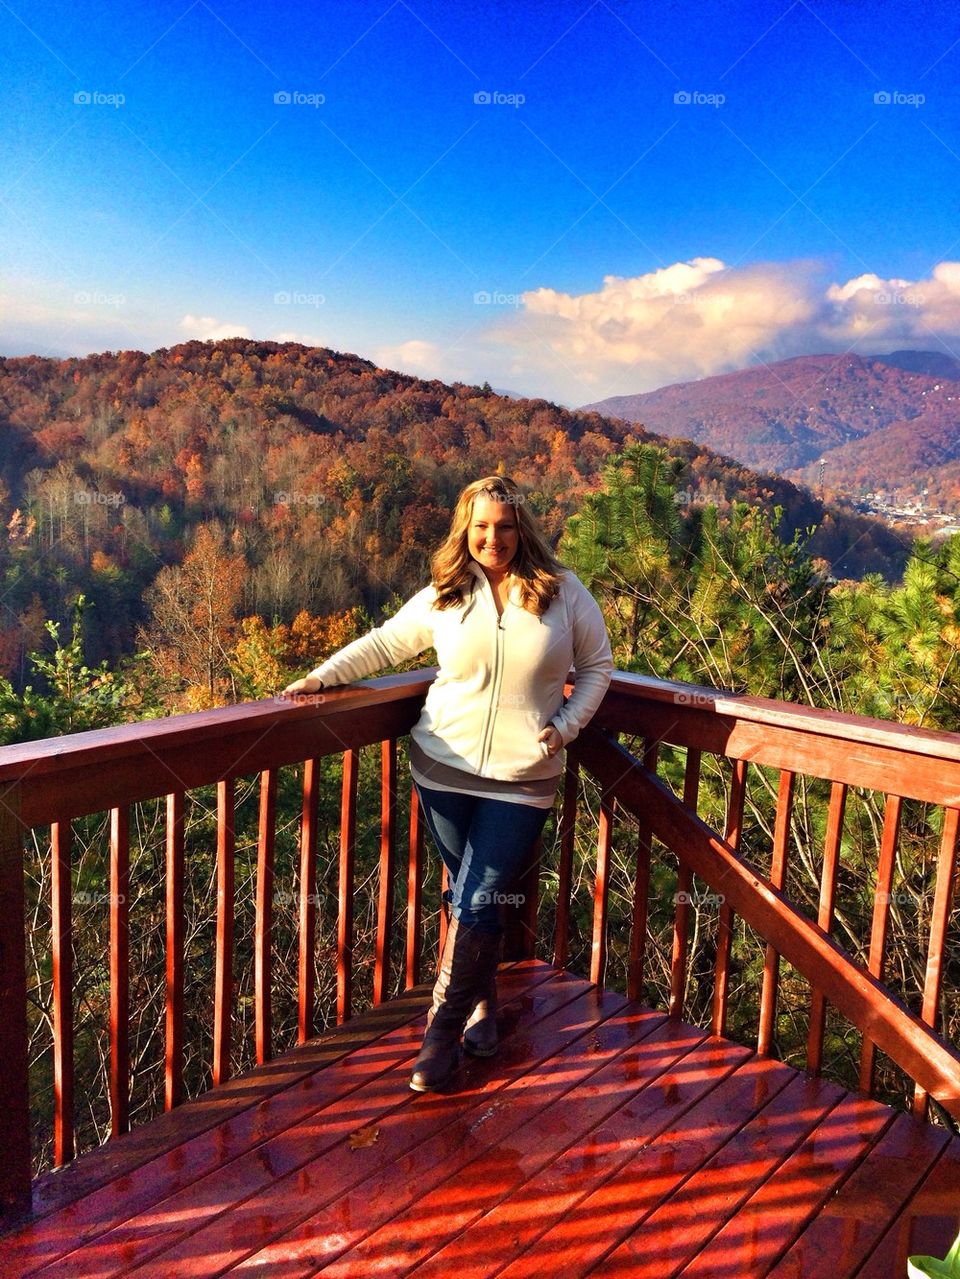 Fall in The Great Smokey Mountains